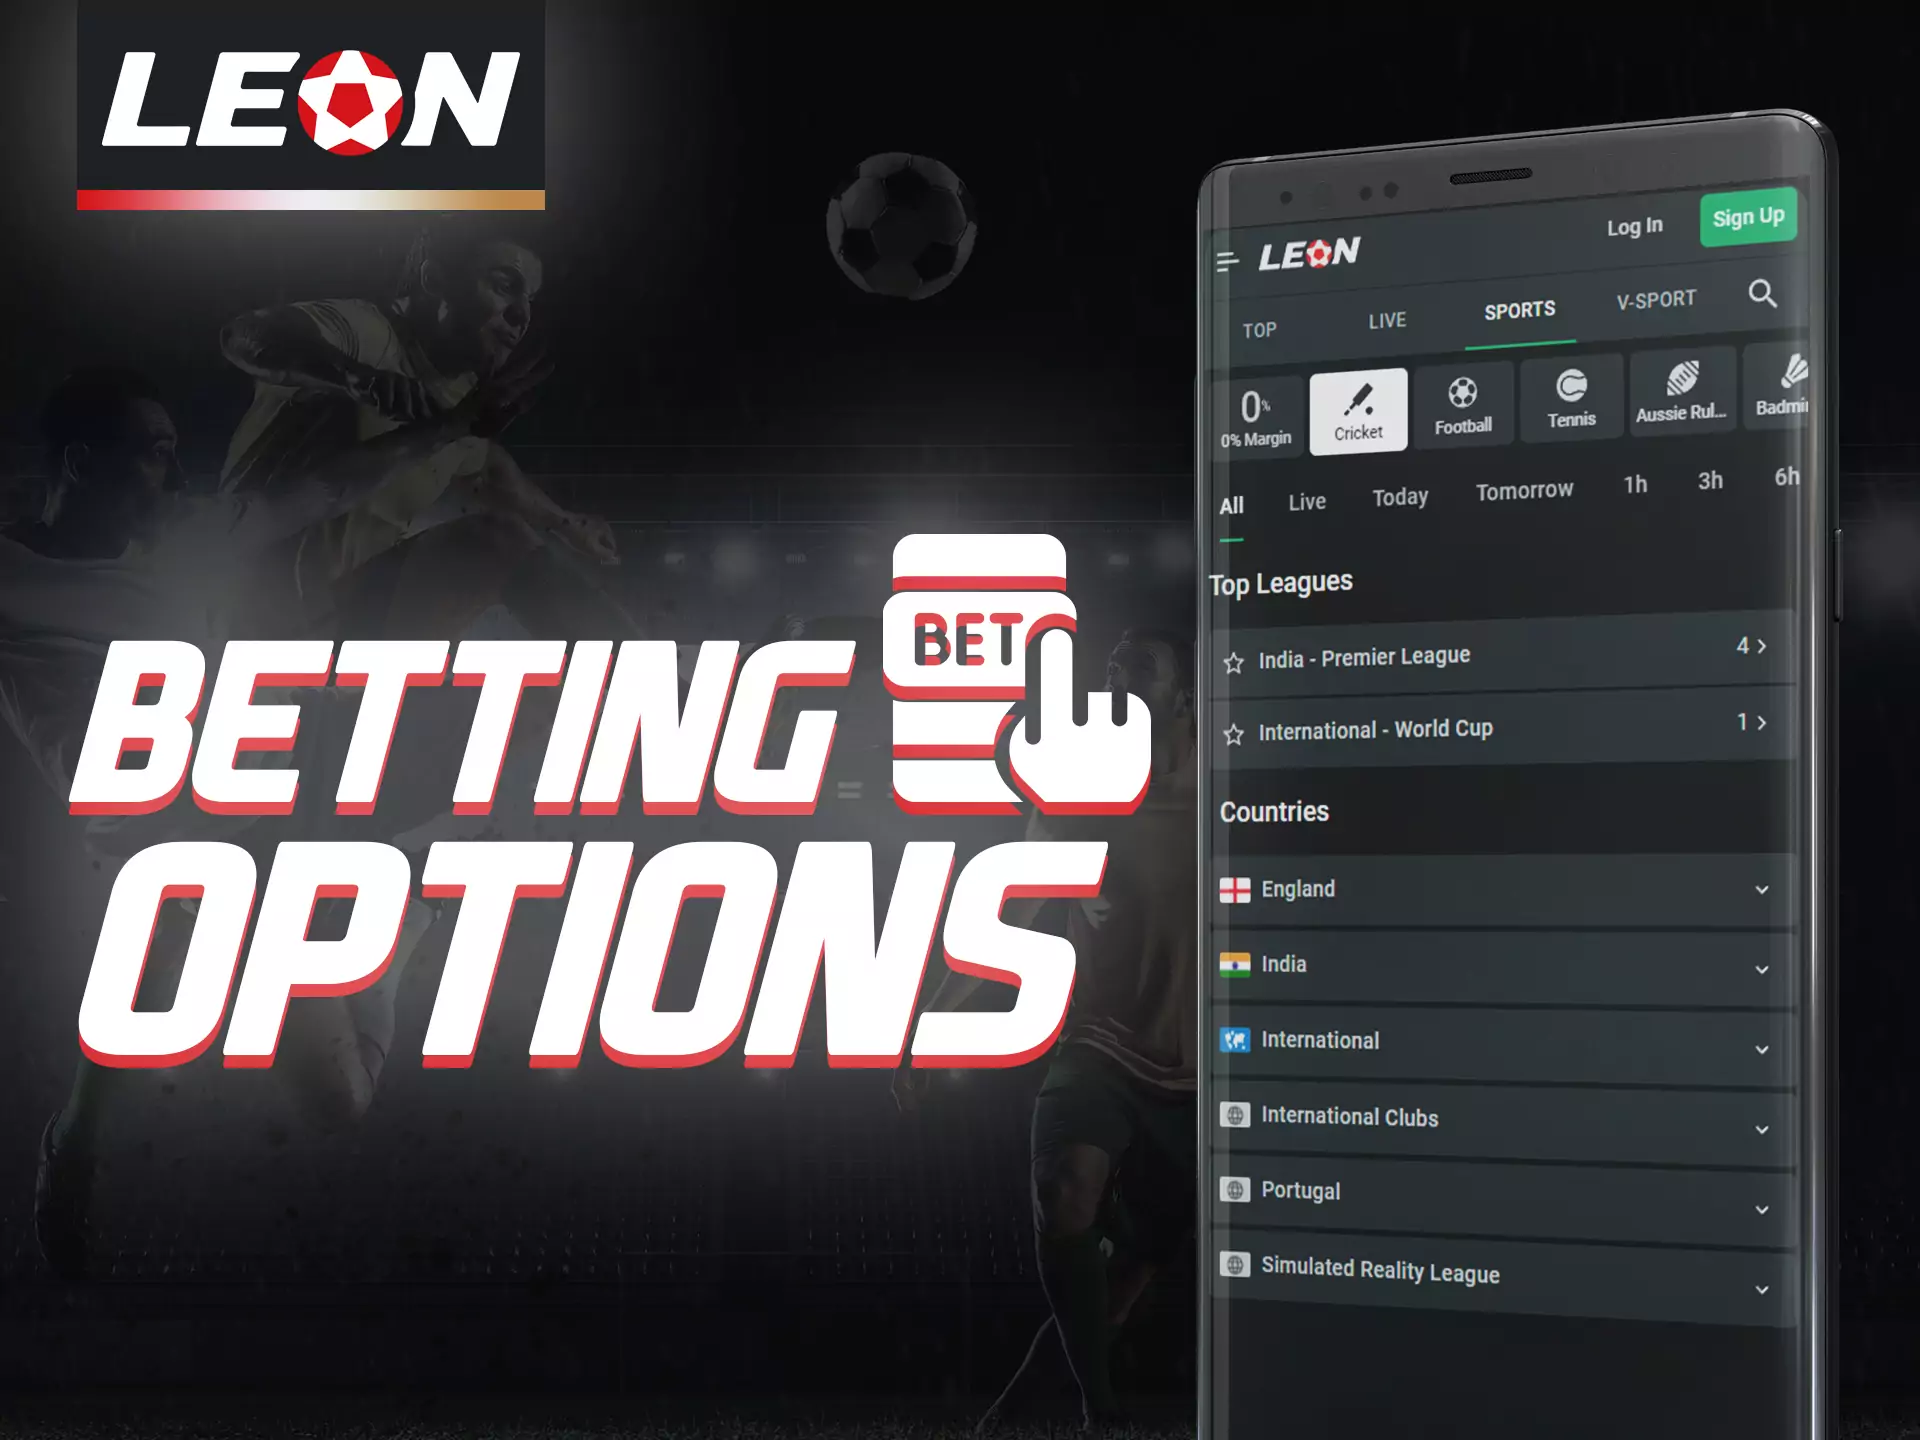 On the Leonbet app, try out the different options for sports betting.